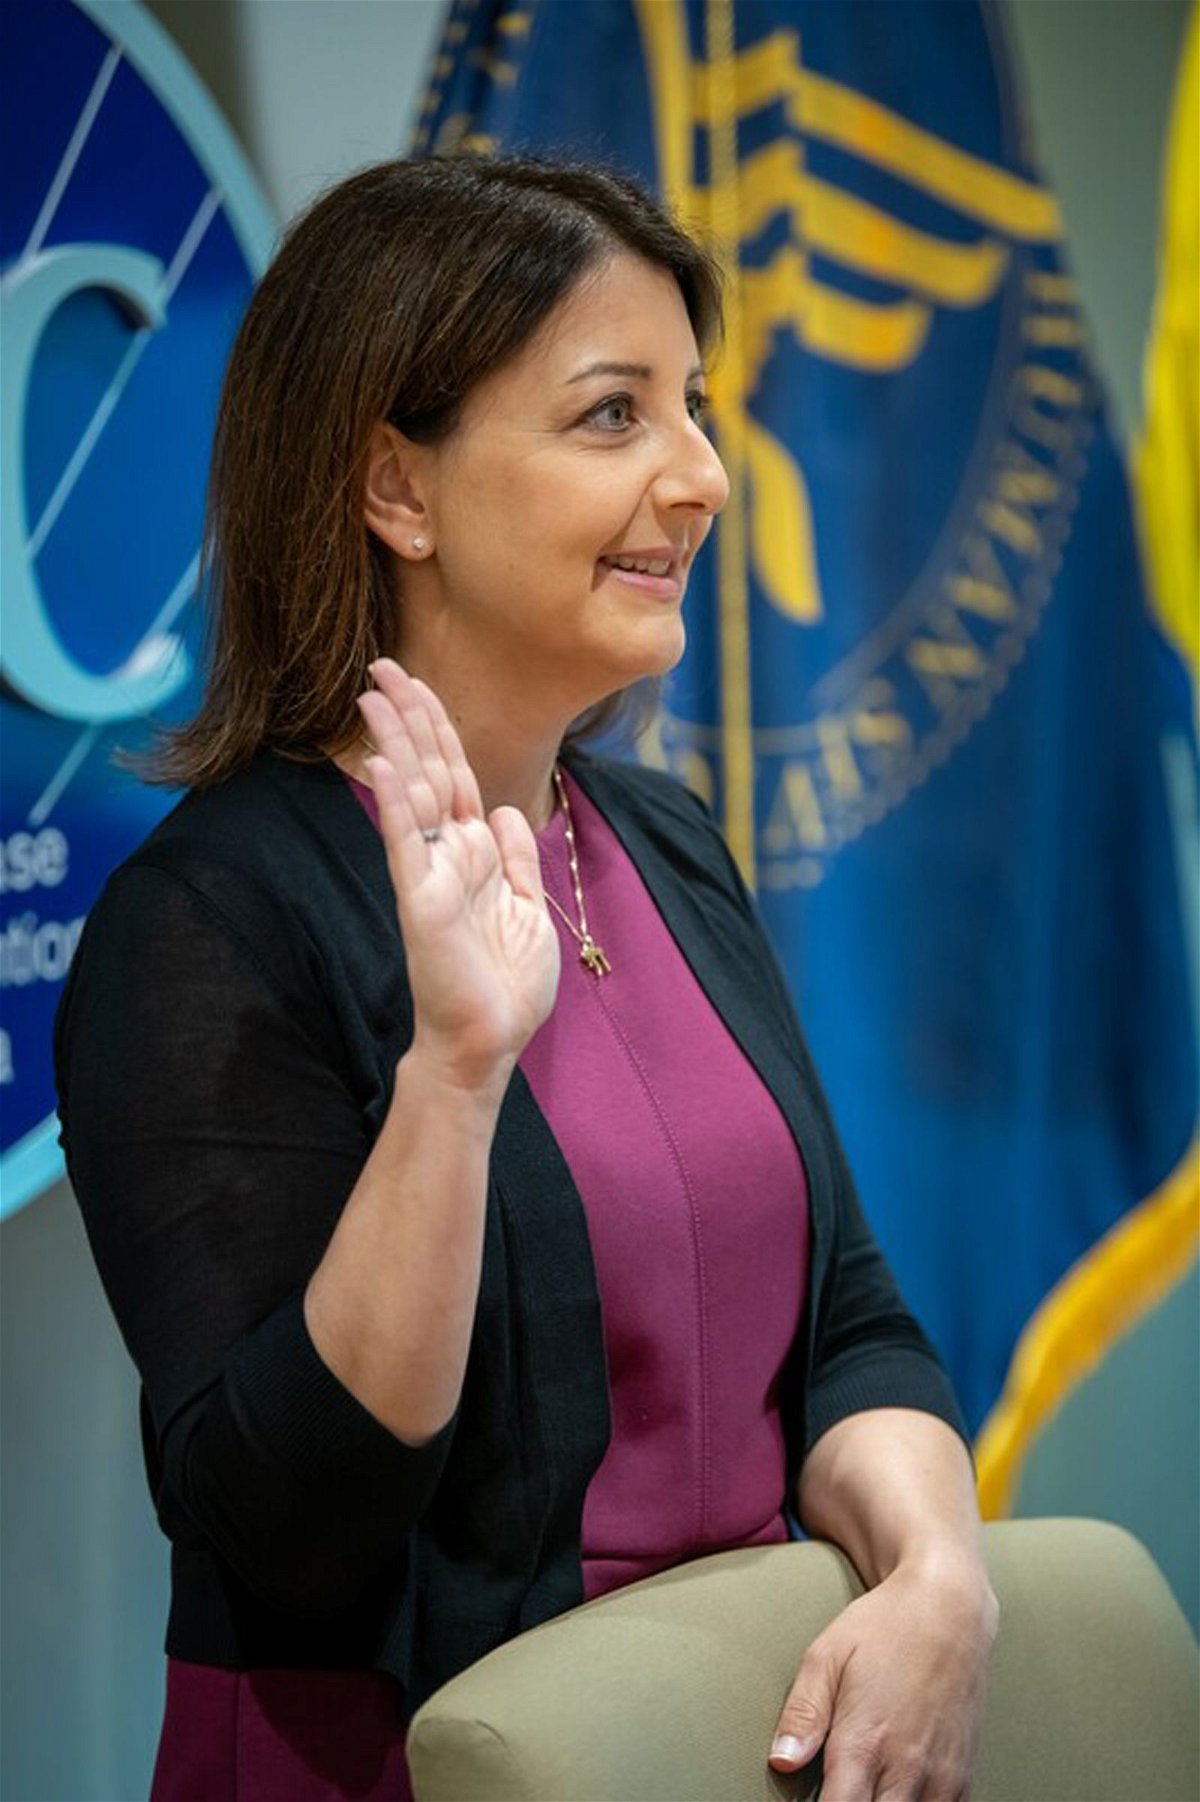 Dr. Mandy Cohen was sworn in as the 20th director of the US Centers for Disease Control and Prevention.